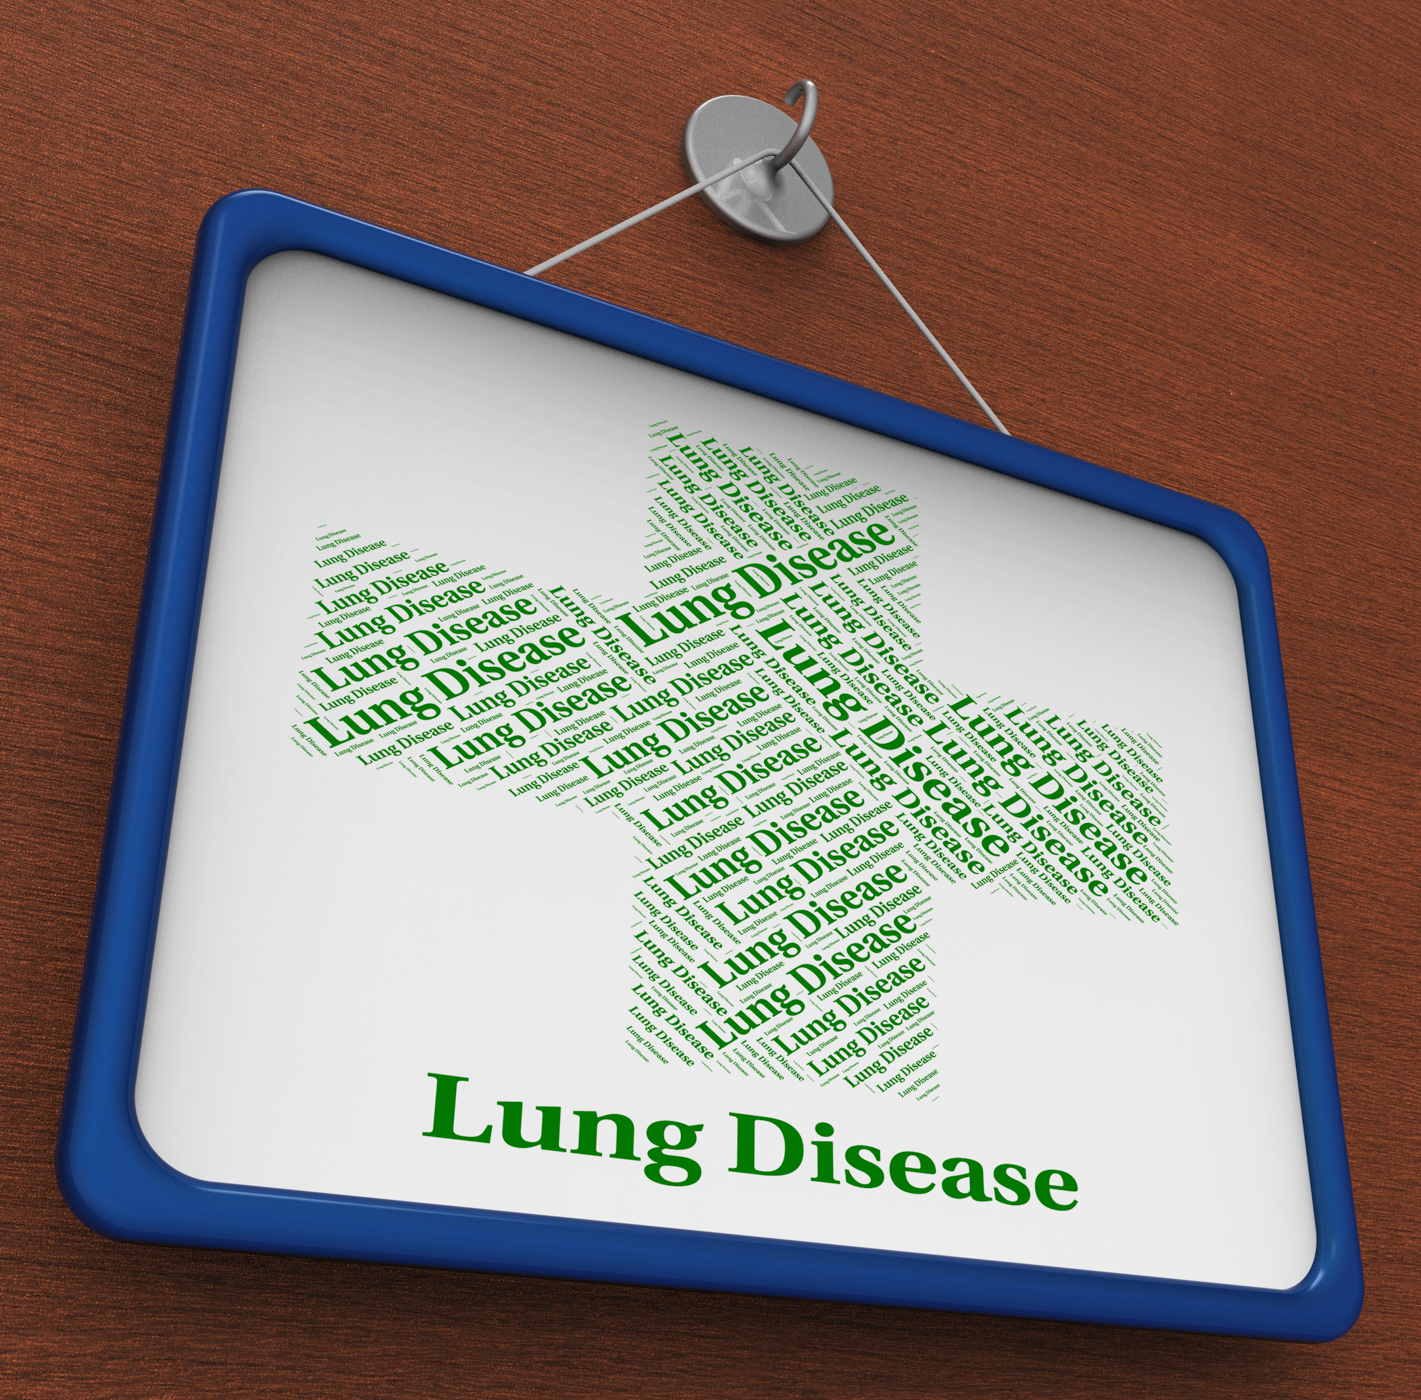 Lung disease shows poor health and affliction photo